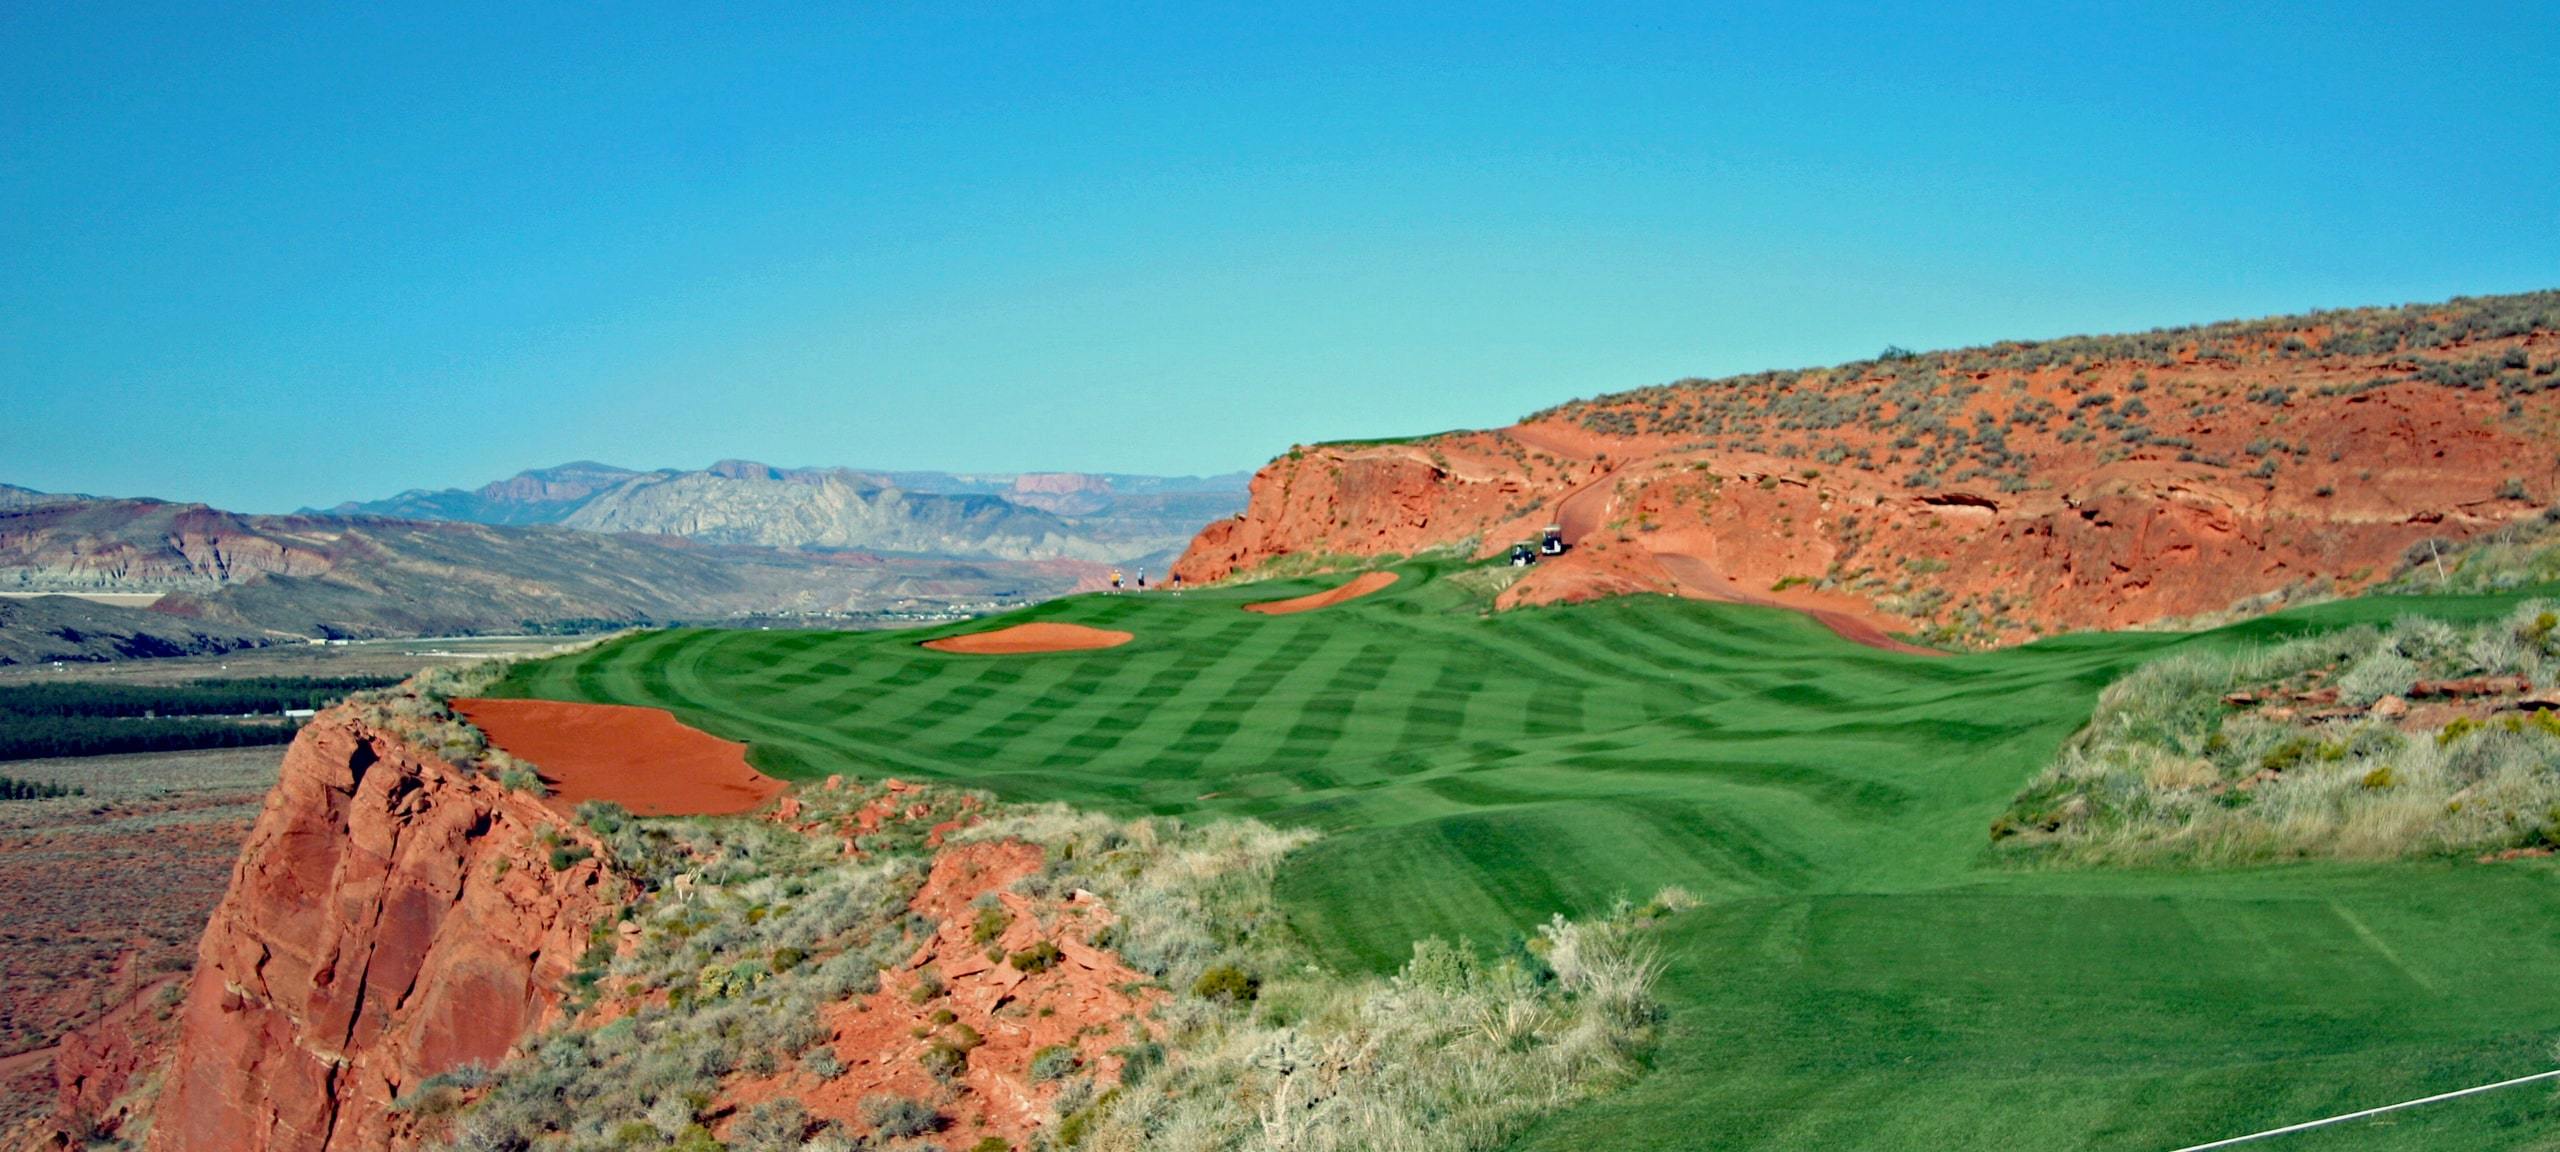 St George, Utah golf course with scenic views of sunny desert hills